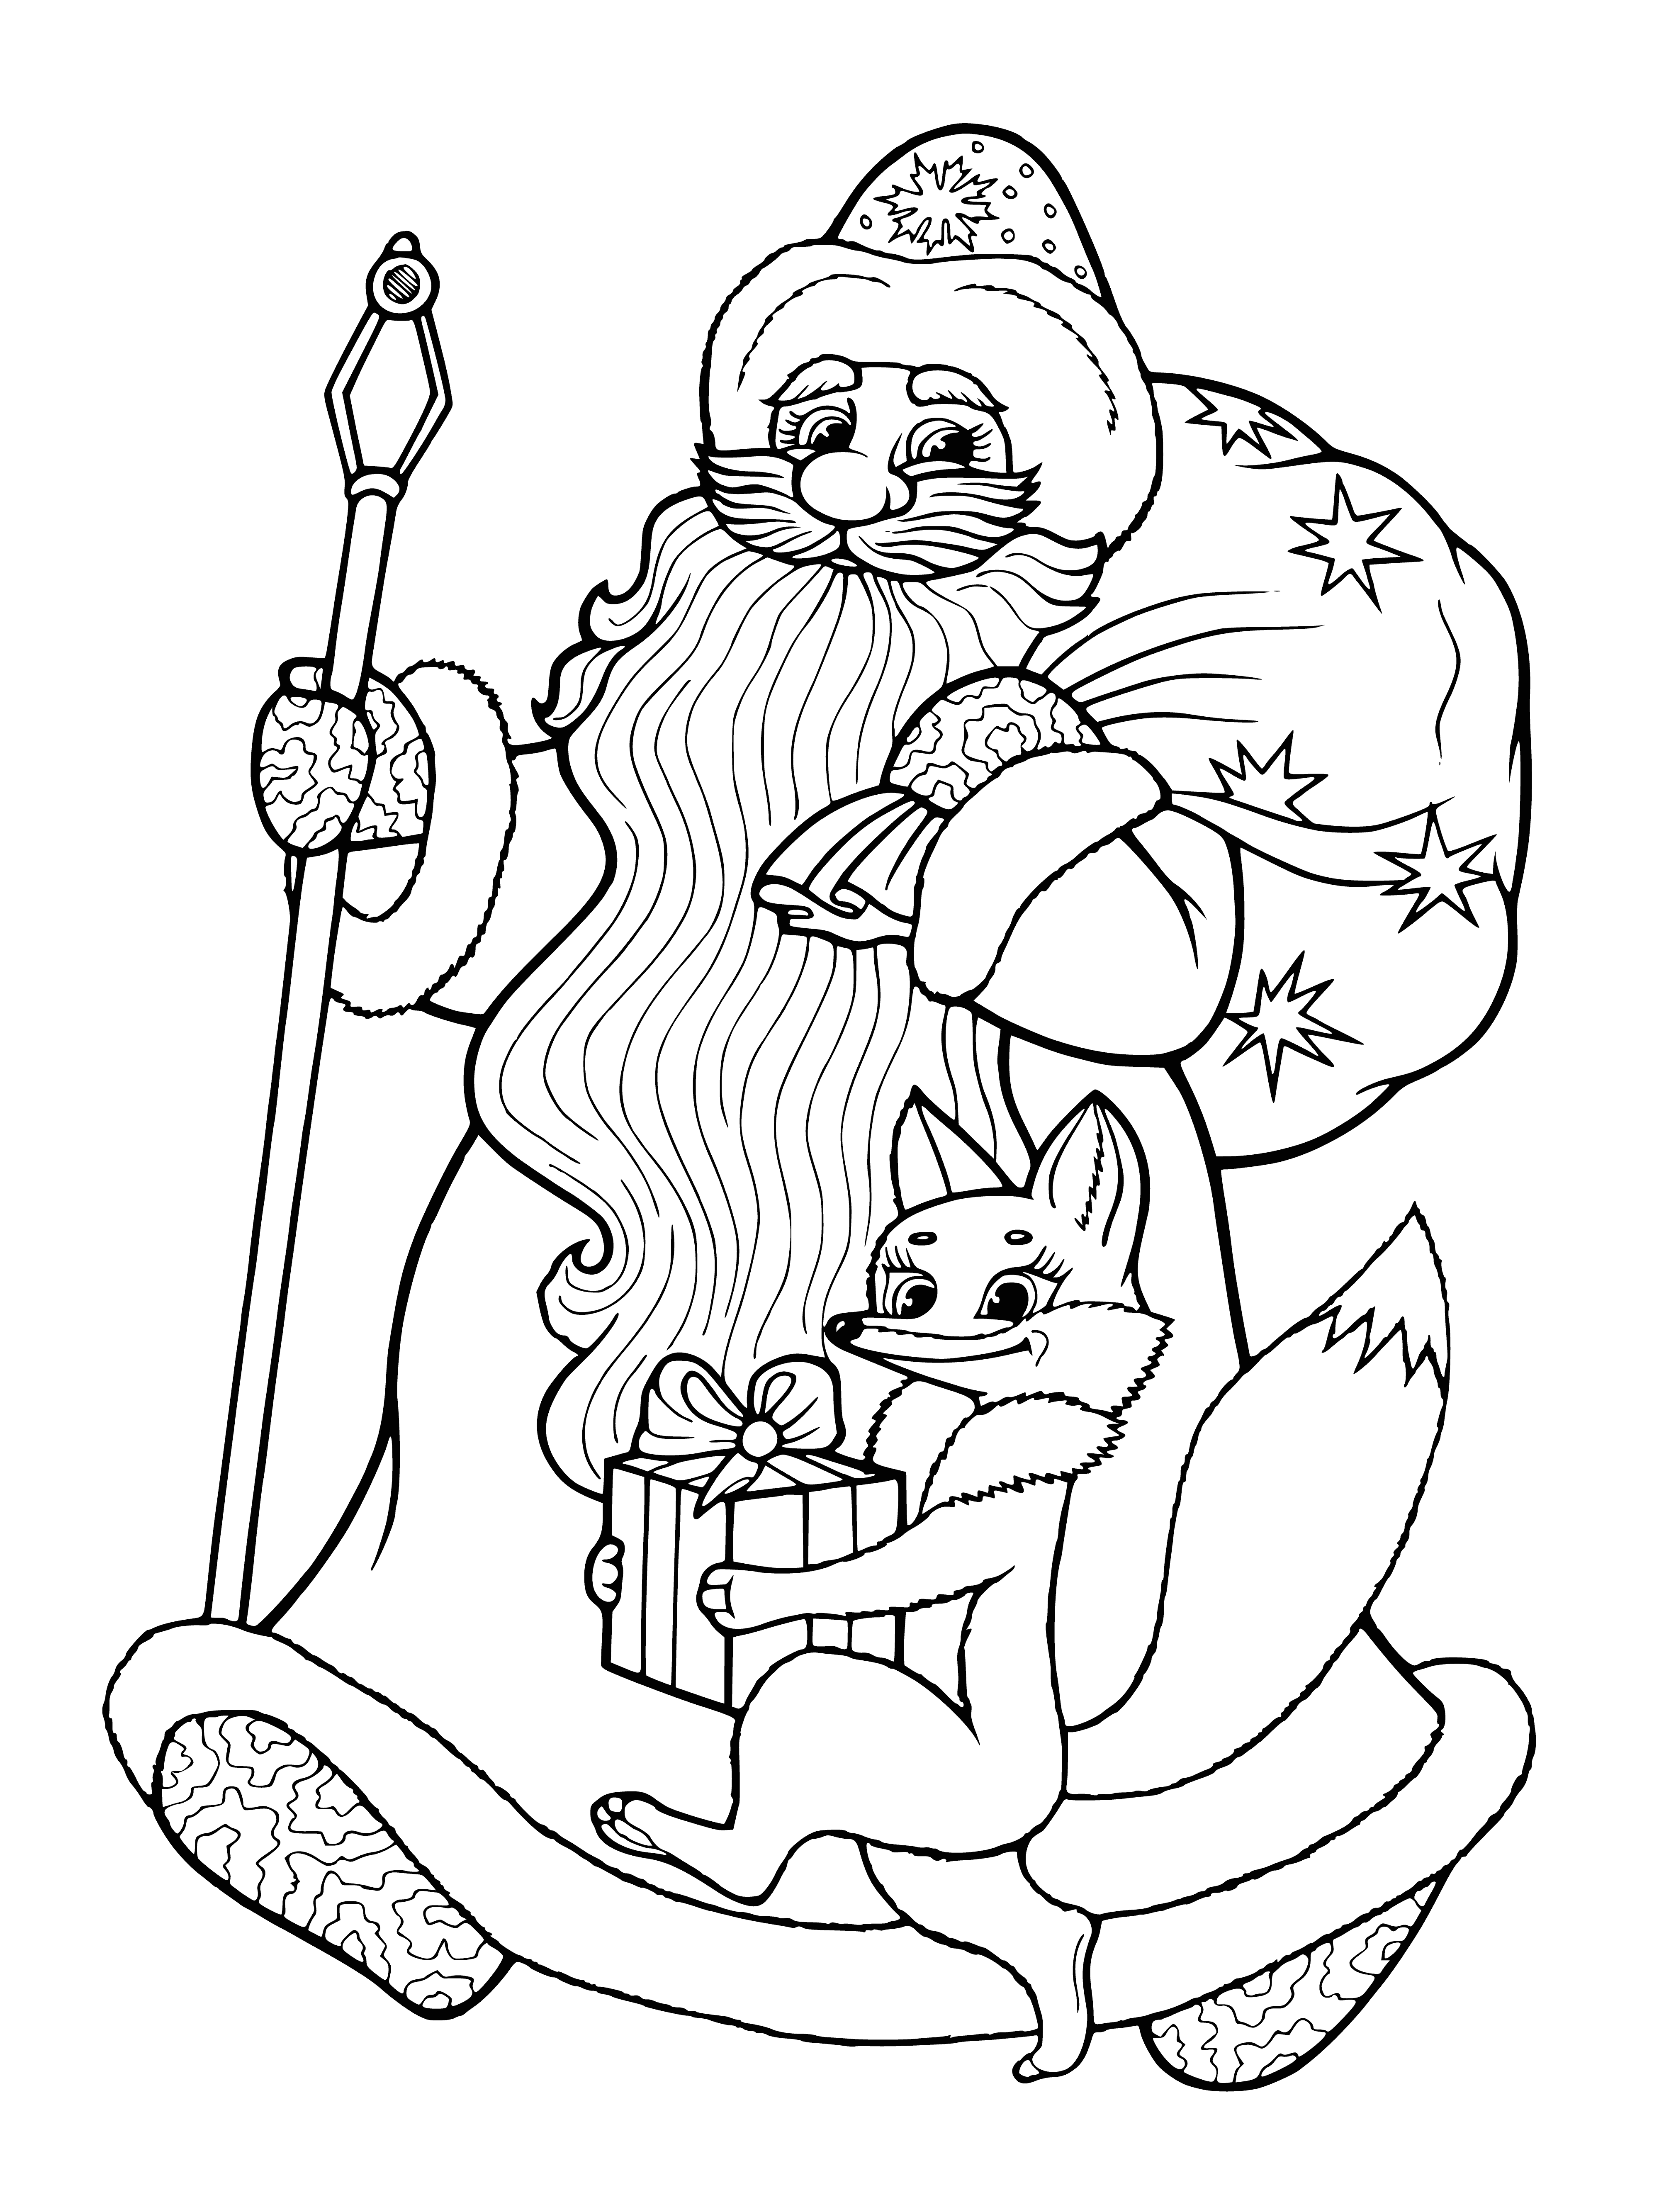 Santa Claus is an elderly man with a beard, red coat & pants, a black belt and red hat with white fur trim, standing on a ladder and holding a sack of presents.